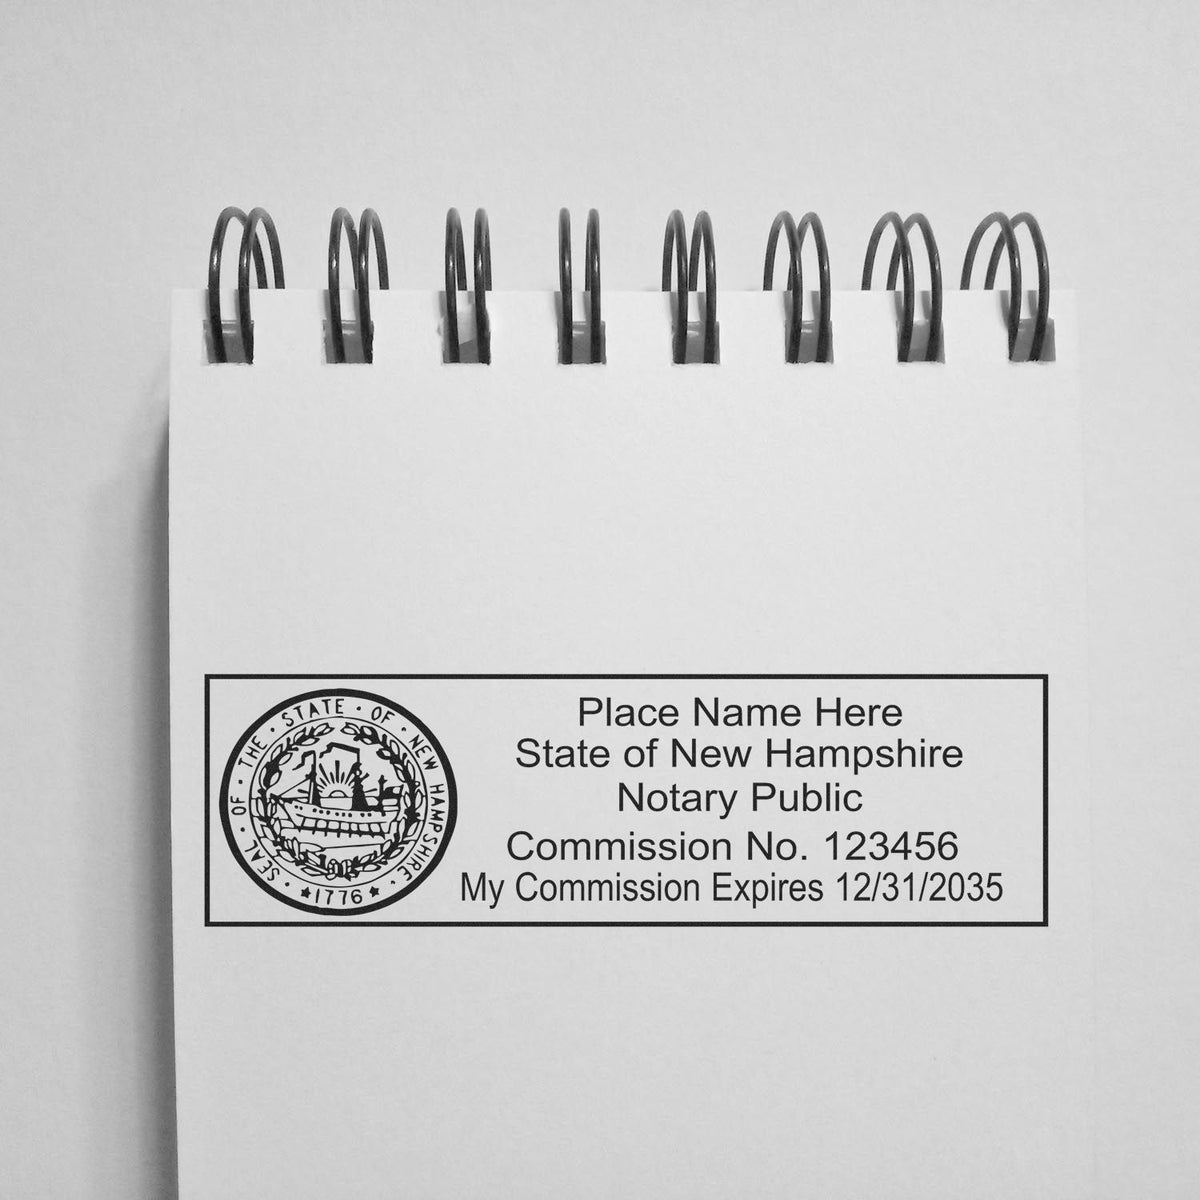 Another Example of a stamped impression of the Self-Inking State Seal New Hampshire Notary Stamp on a piece of office paper.